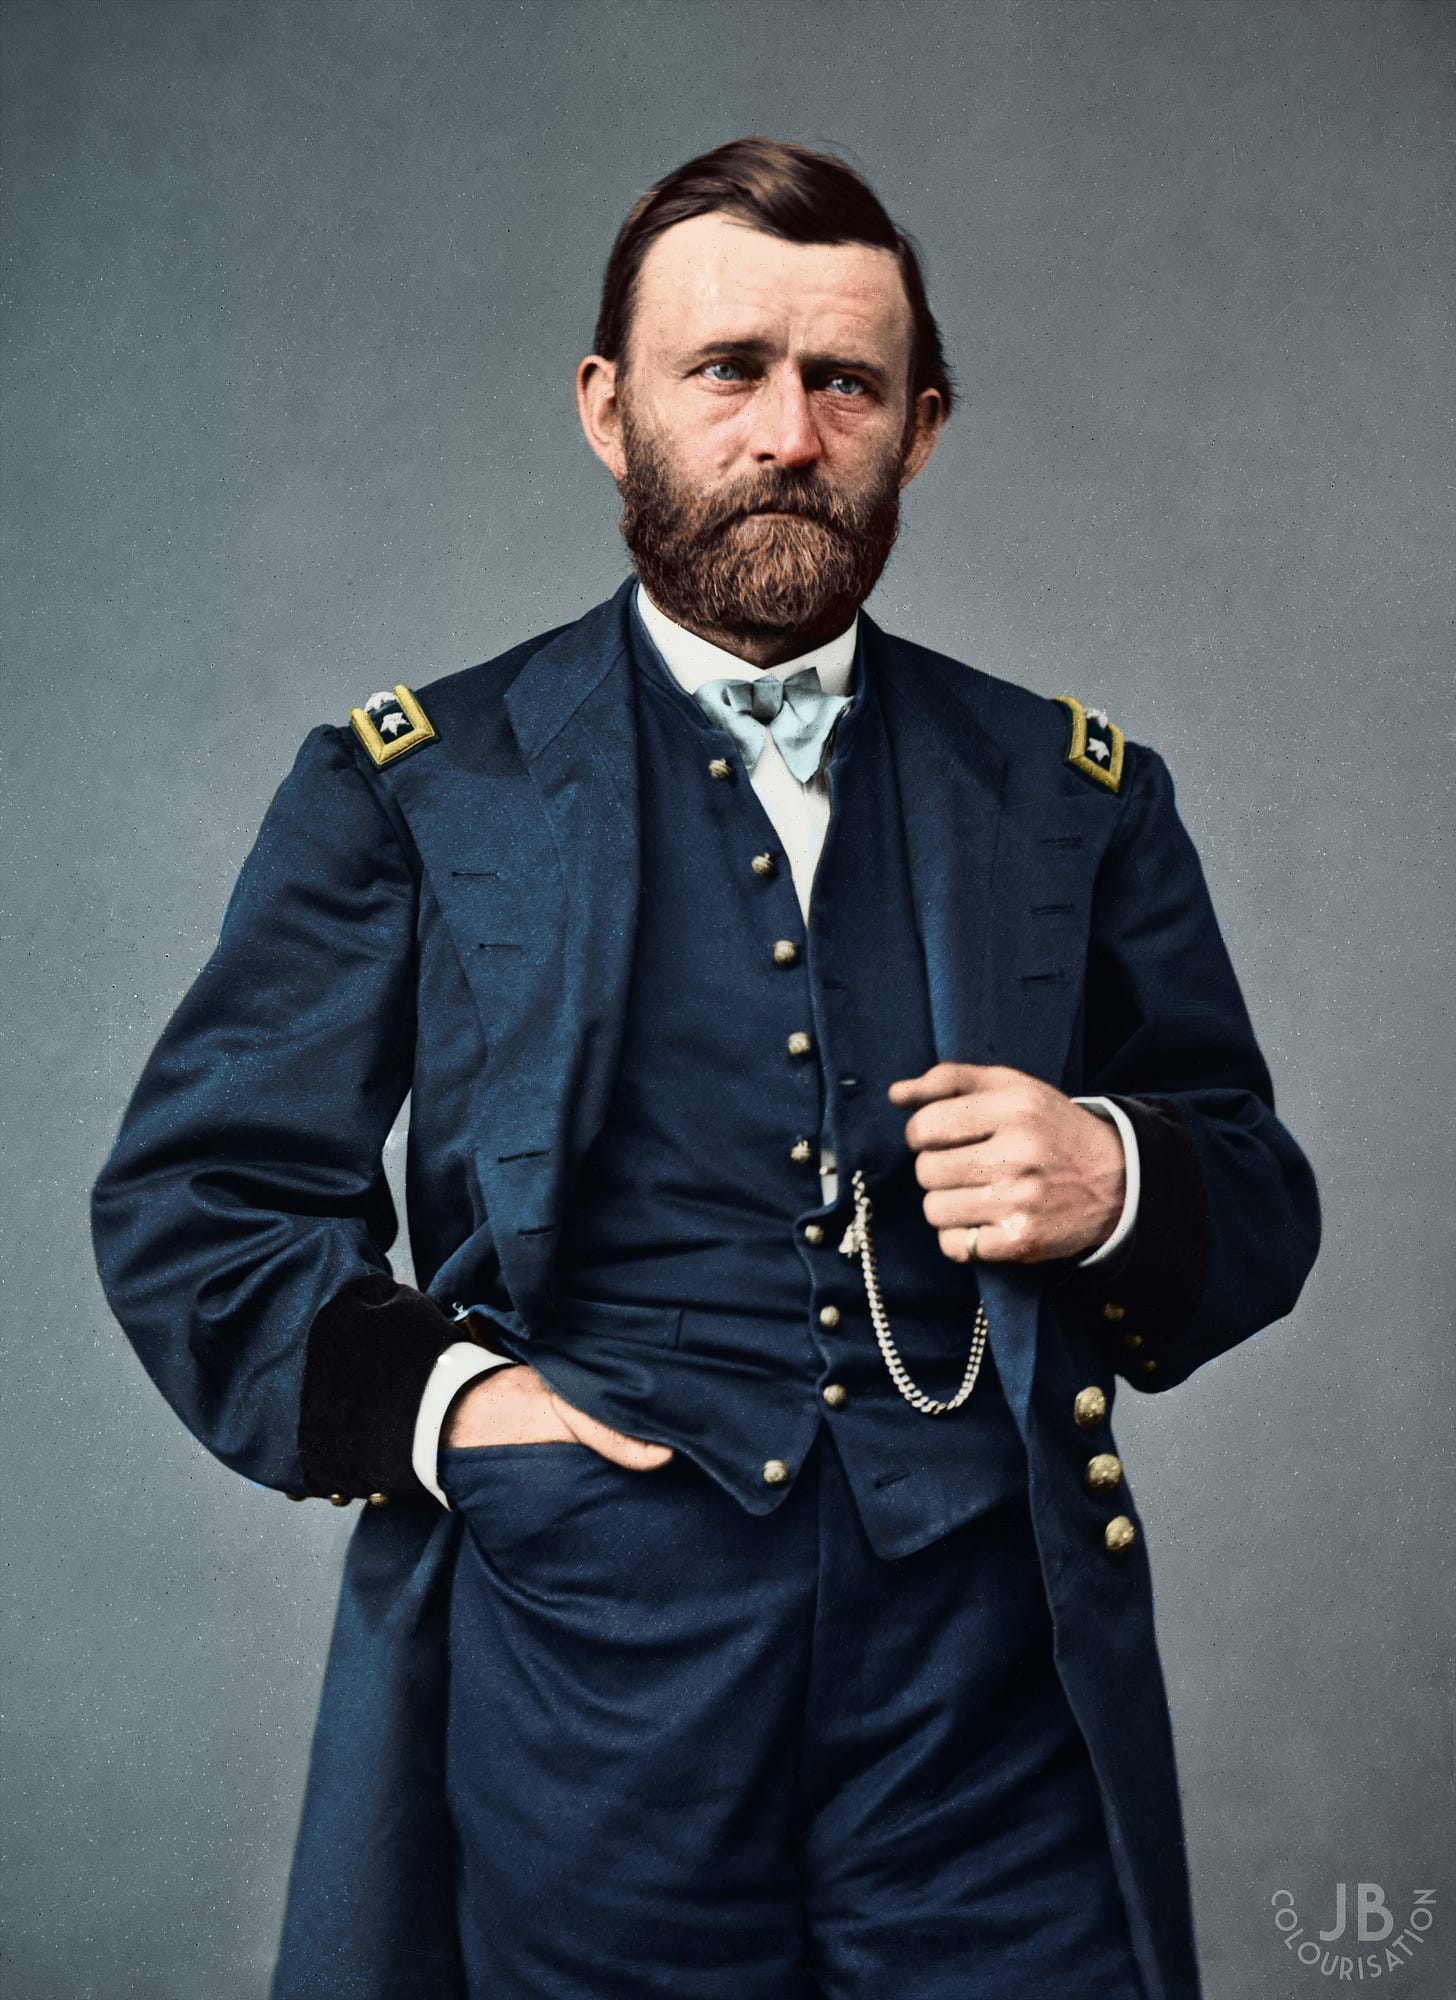 General, and later President, Ulysses S. Grant (C1865): Colorization